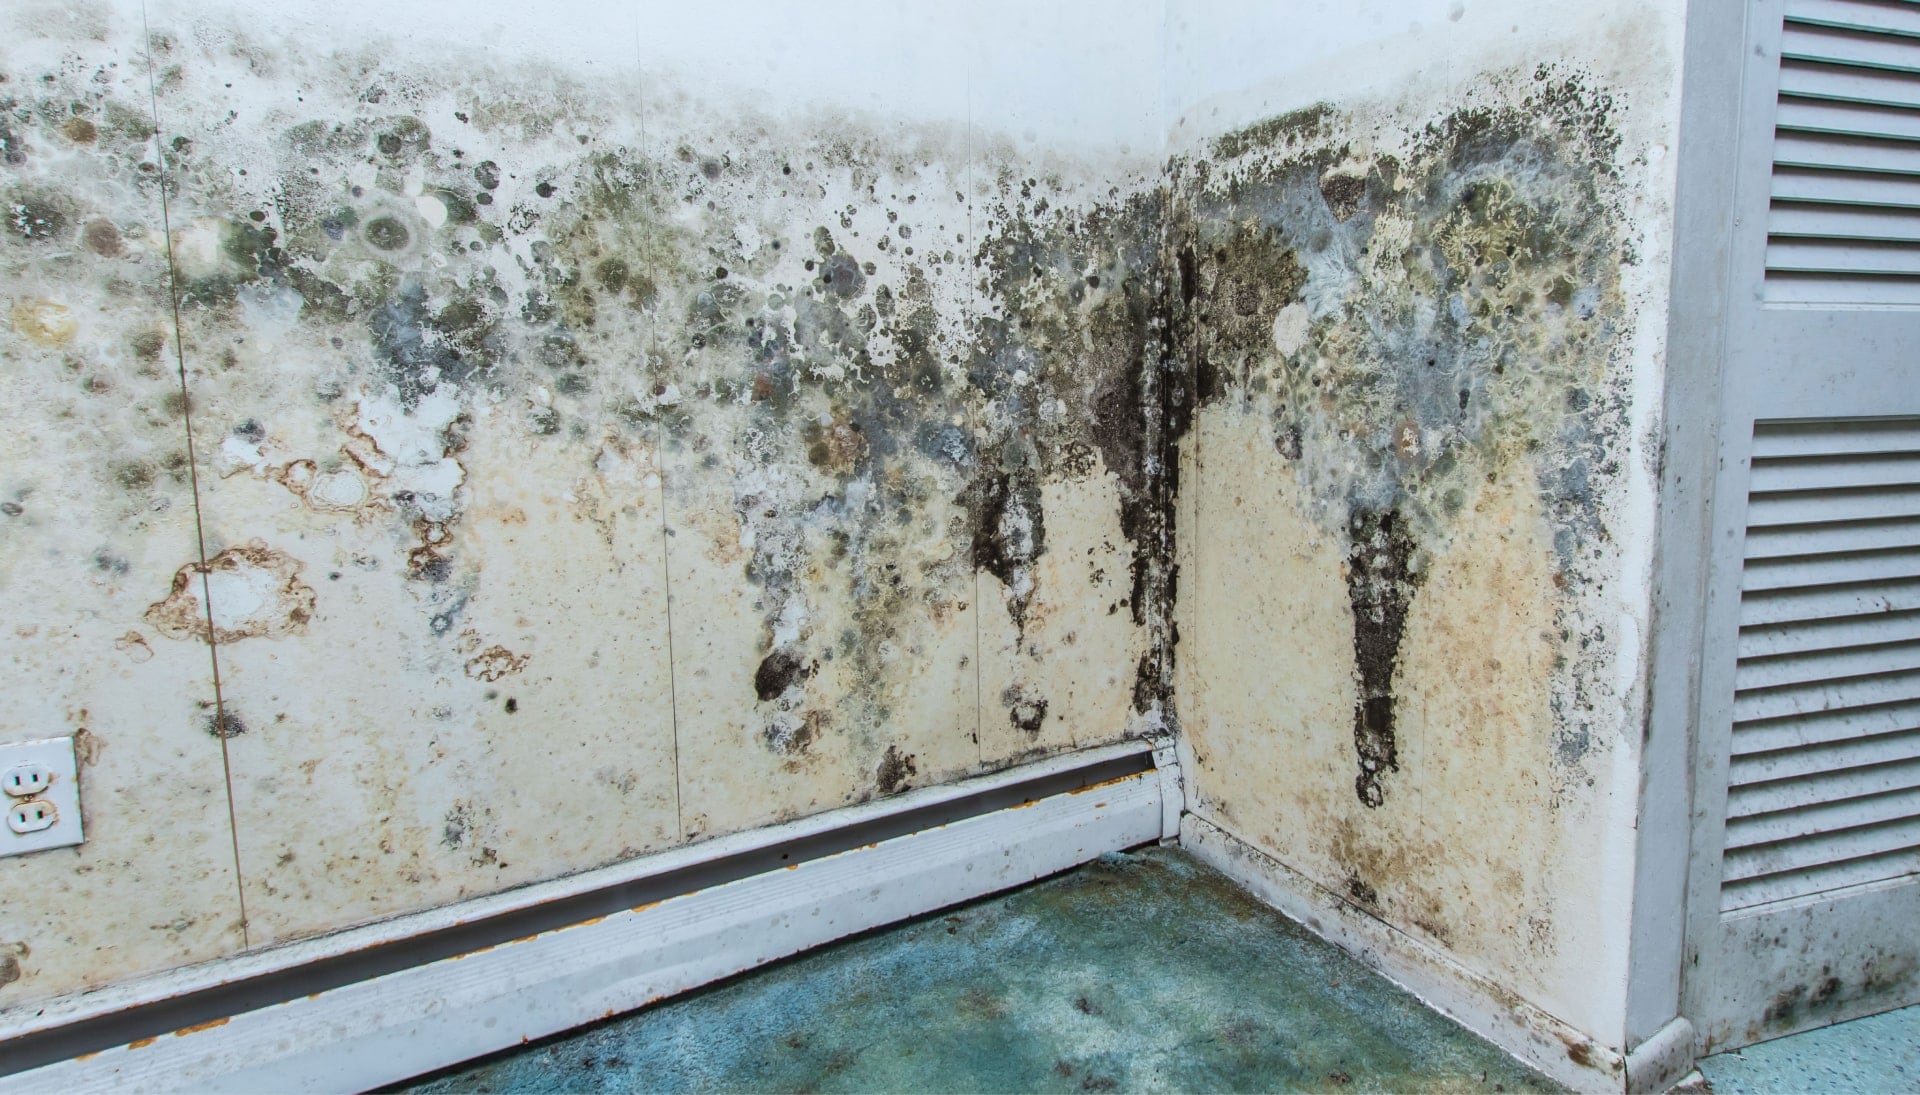 Professional mold removal, odor control, and water damage restoration service in Spokane, Washington.